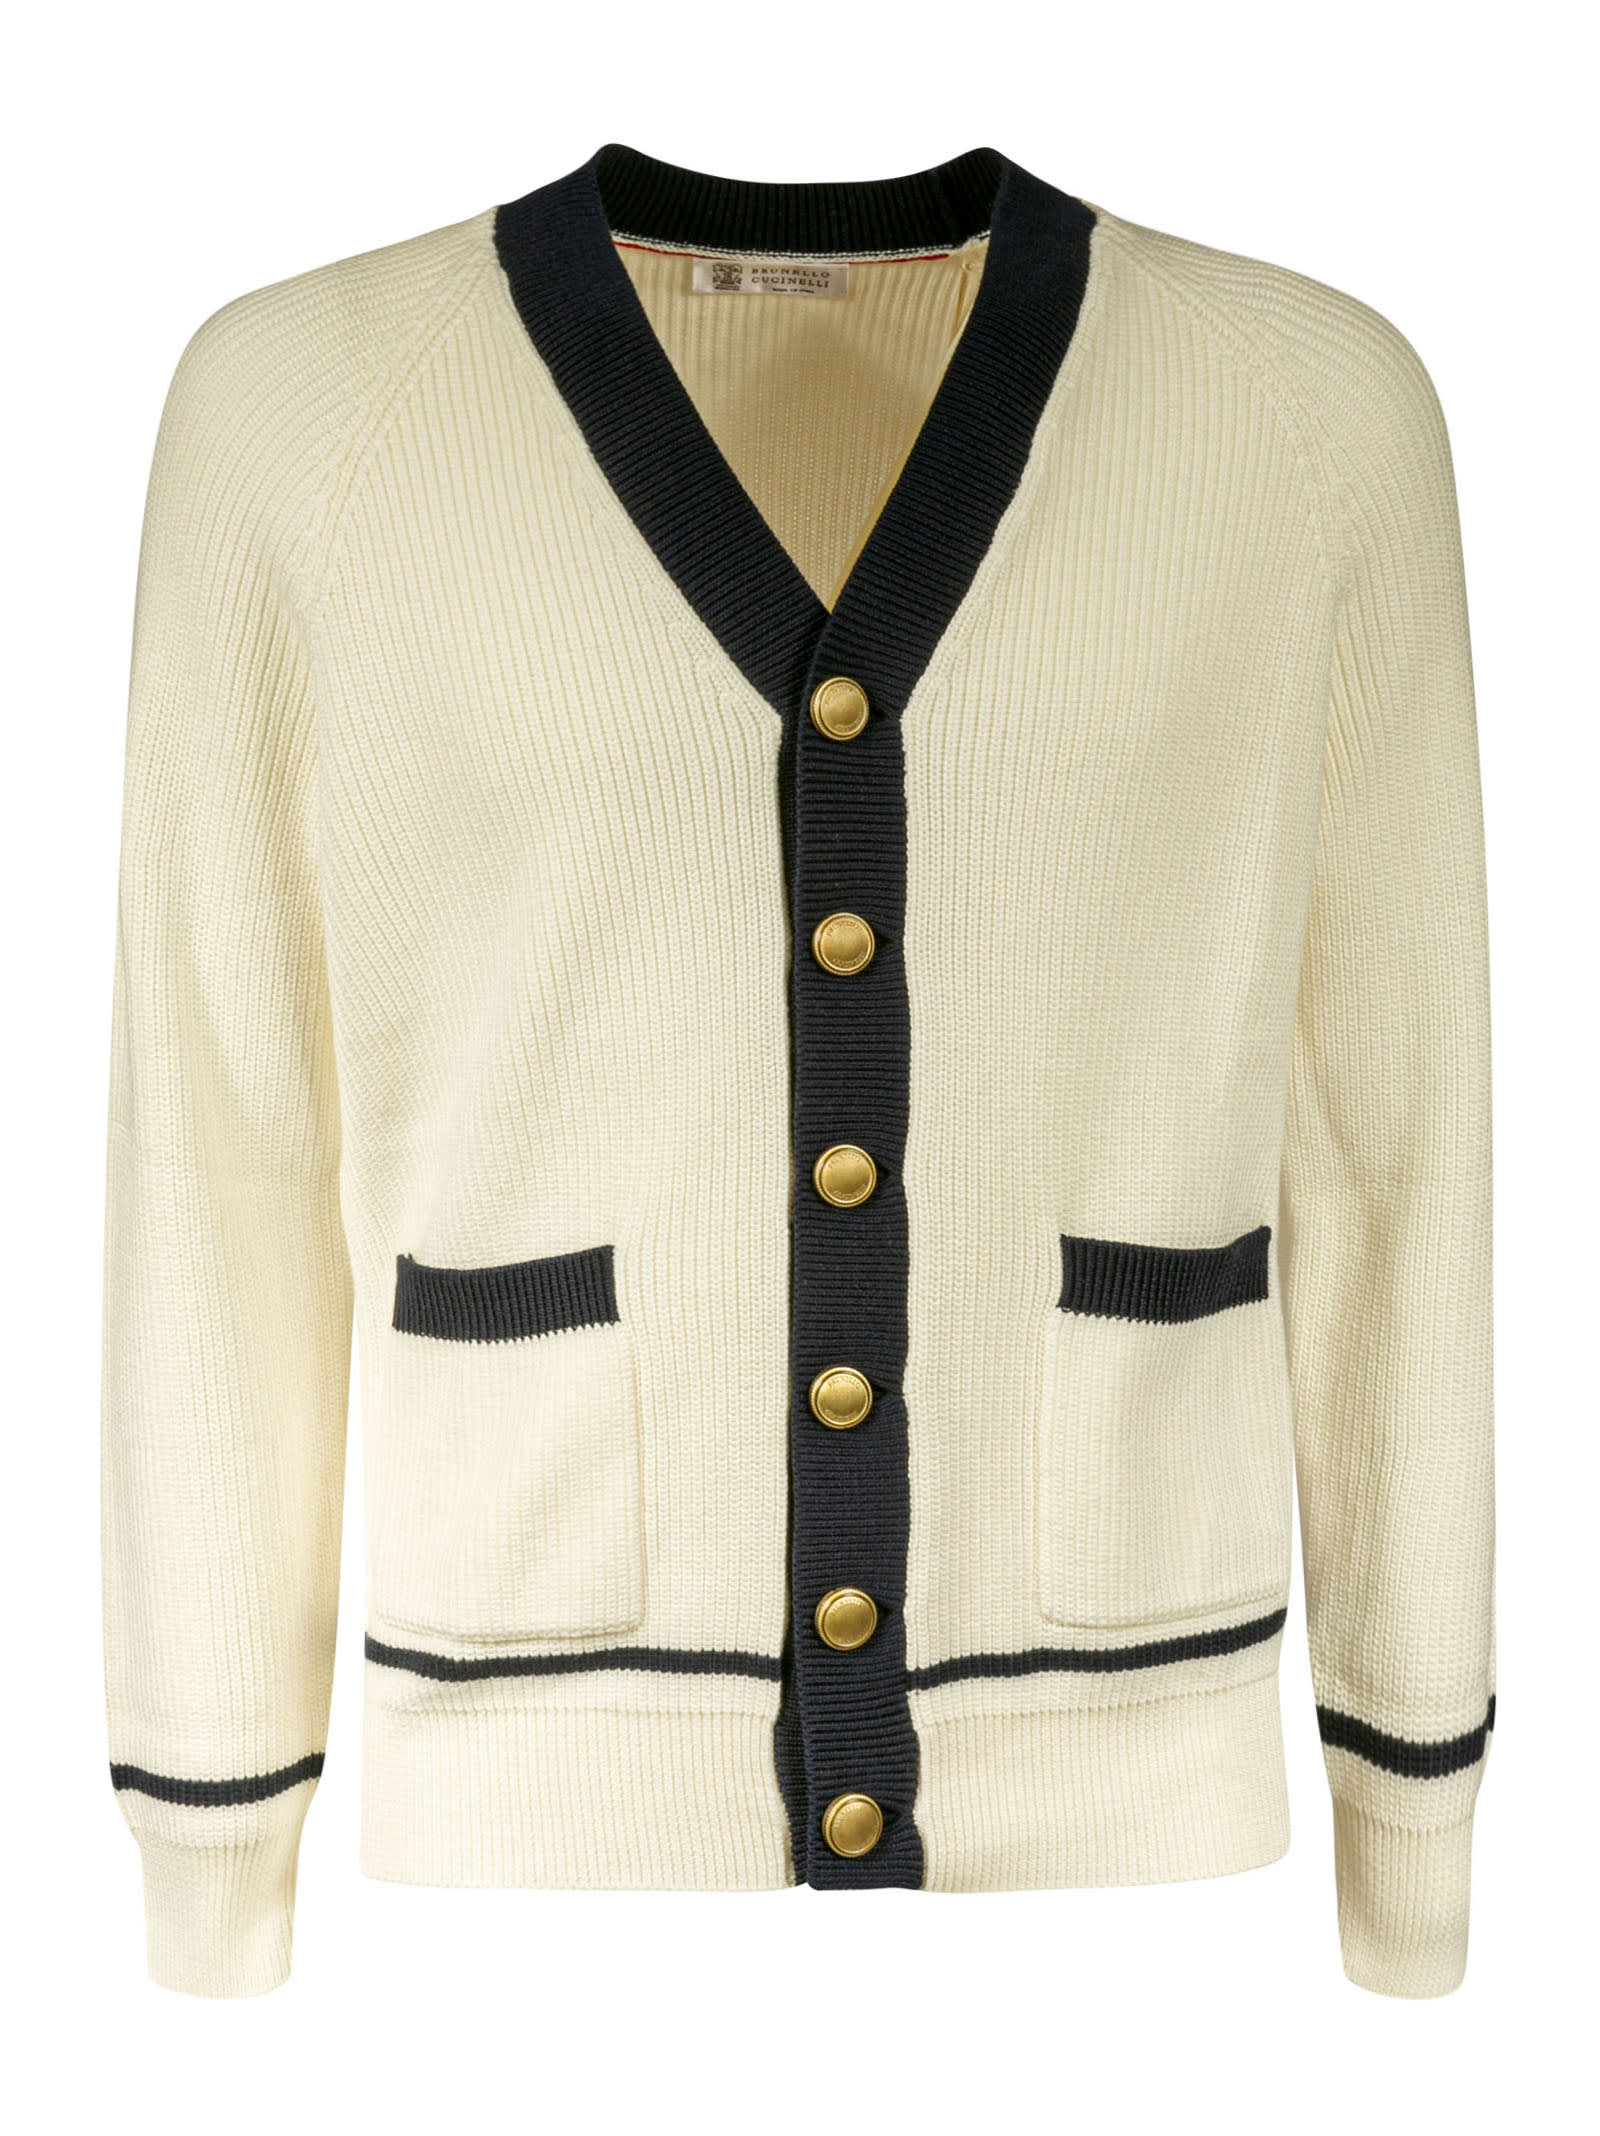 Brunello Cucinelli Ribbed Knit Buttoned Cardigan In White/black